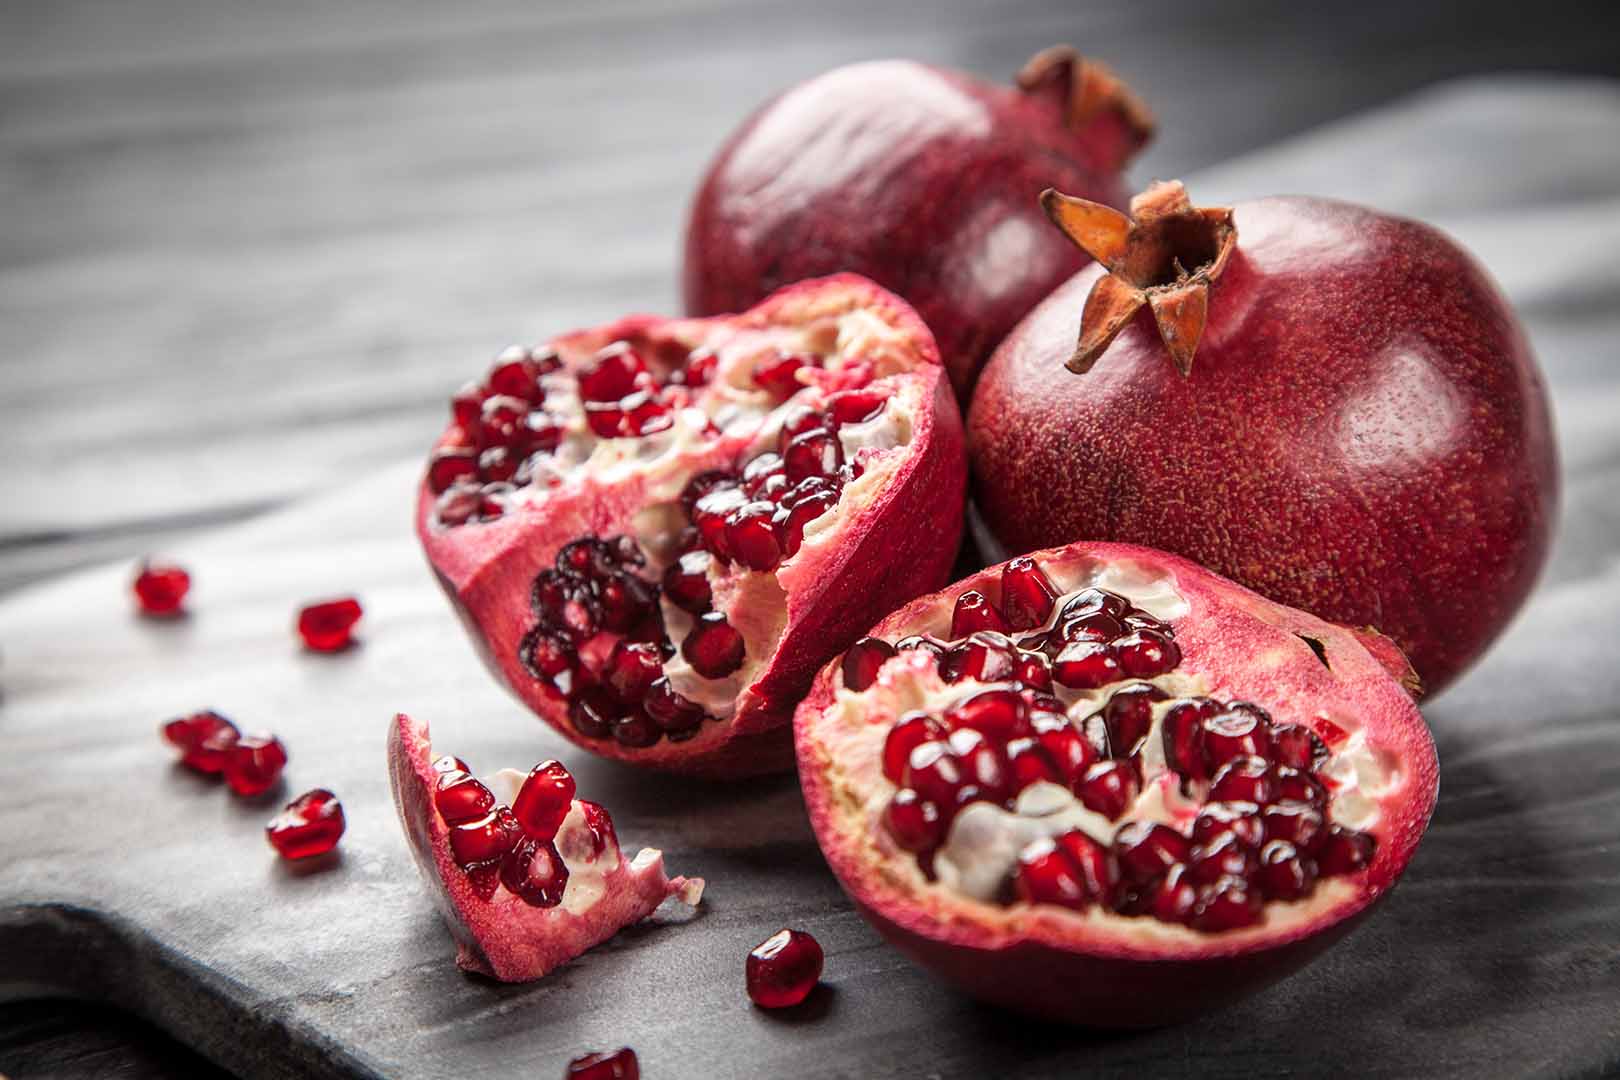 Benefits of Pomegranate for the Body